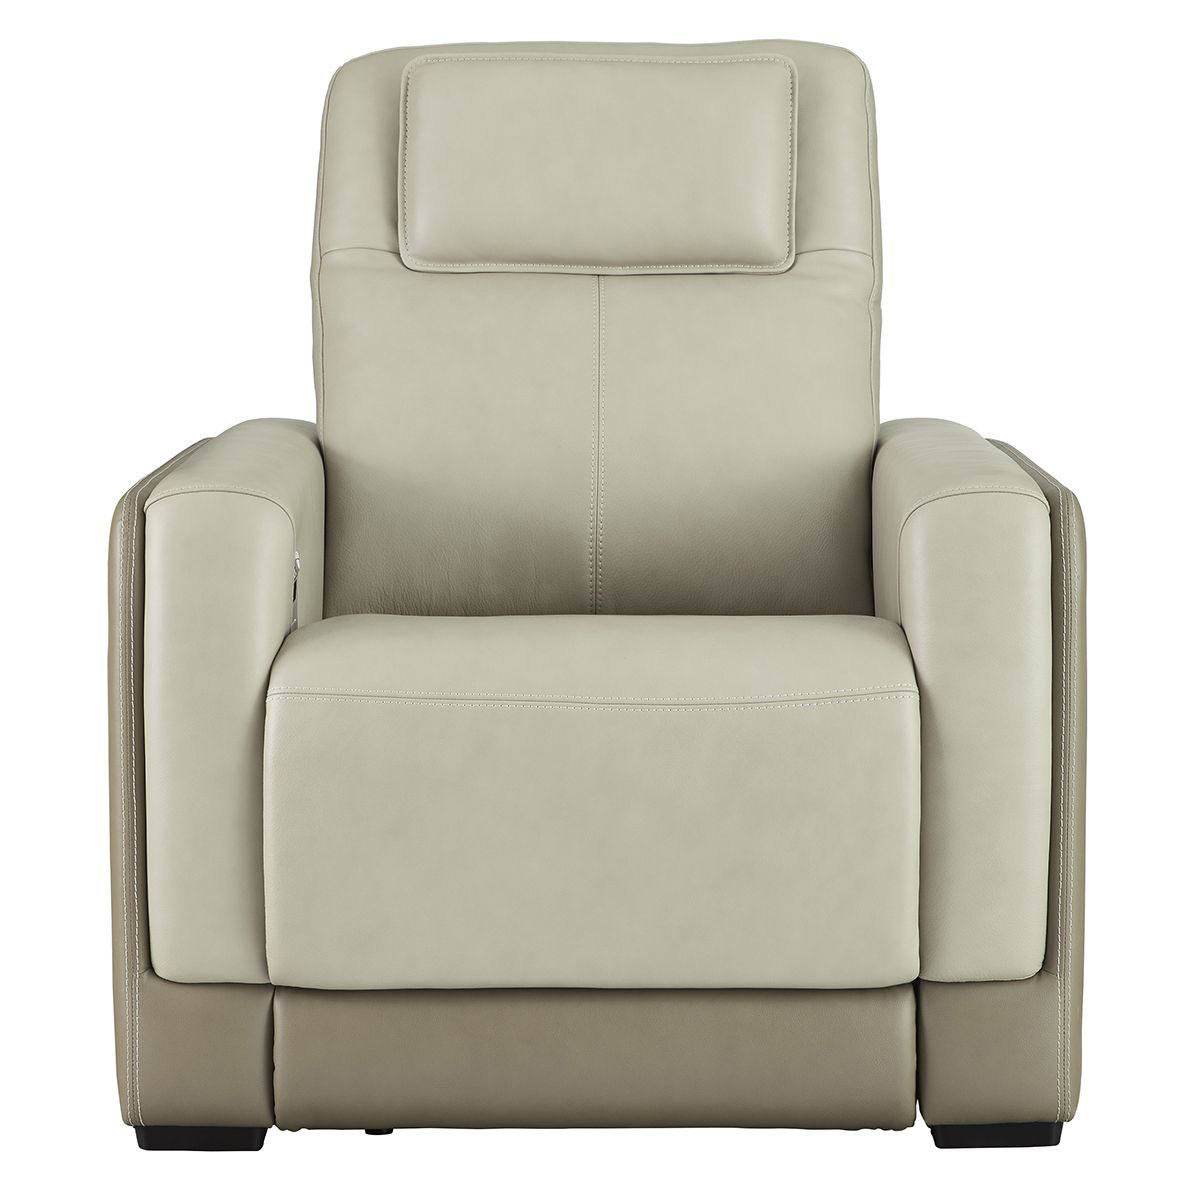 Picture of SANTA ROSA PWR RECLINER